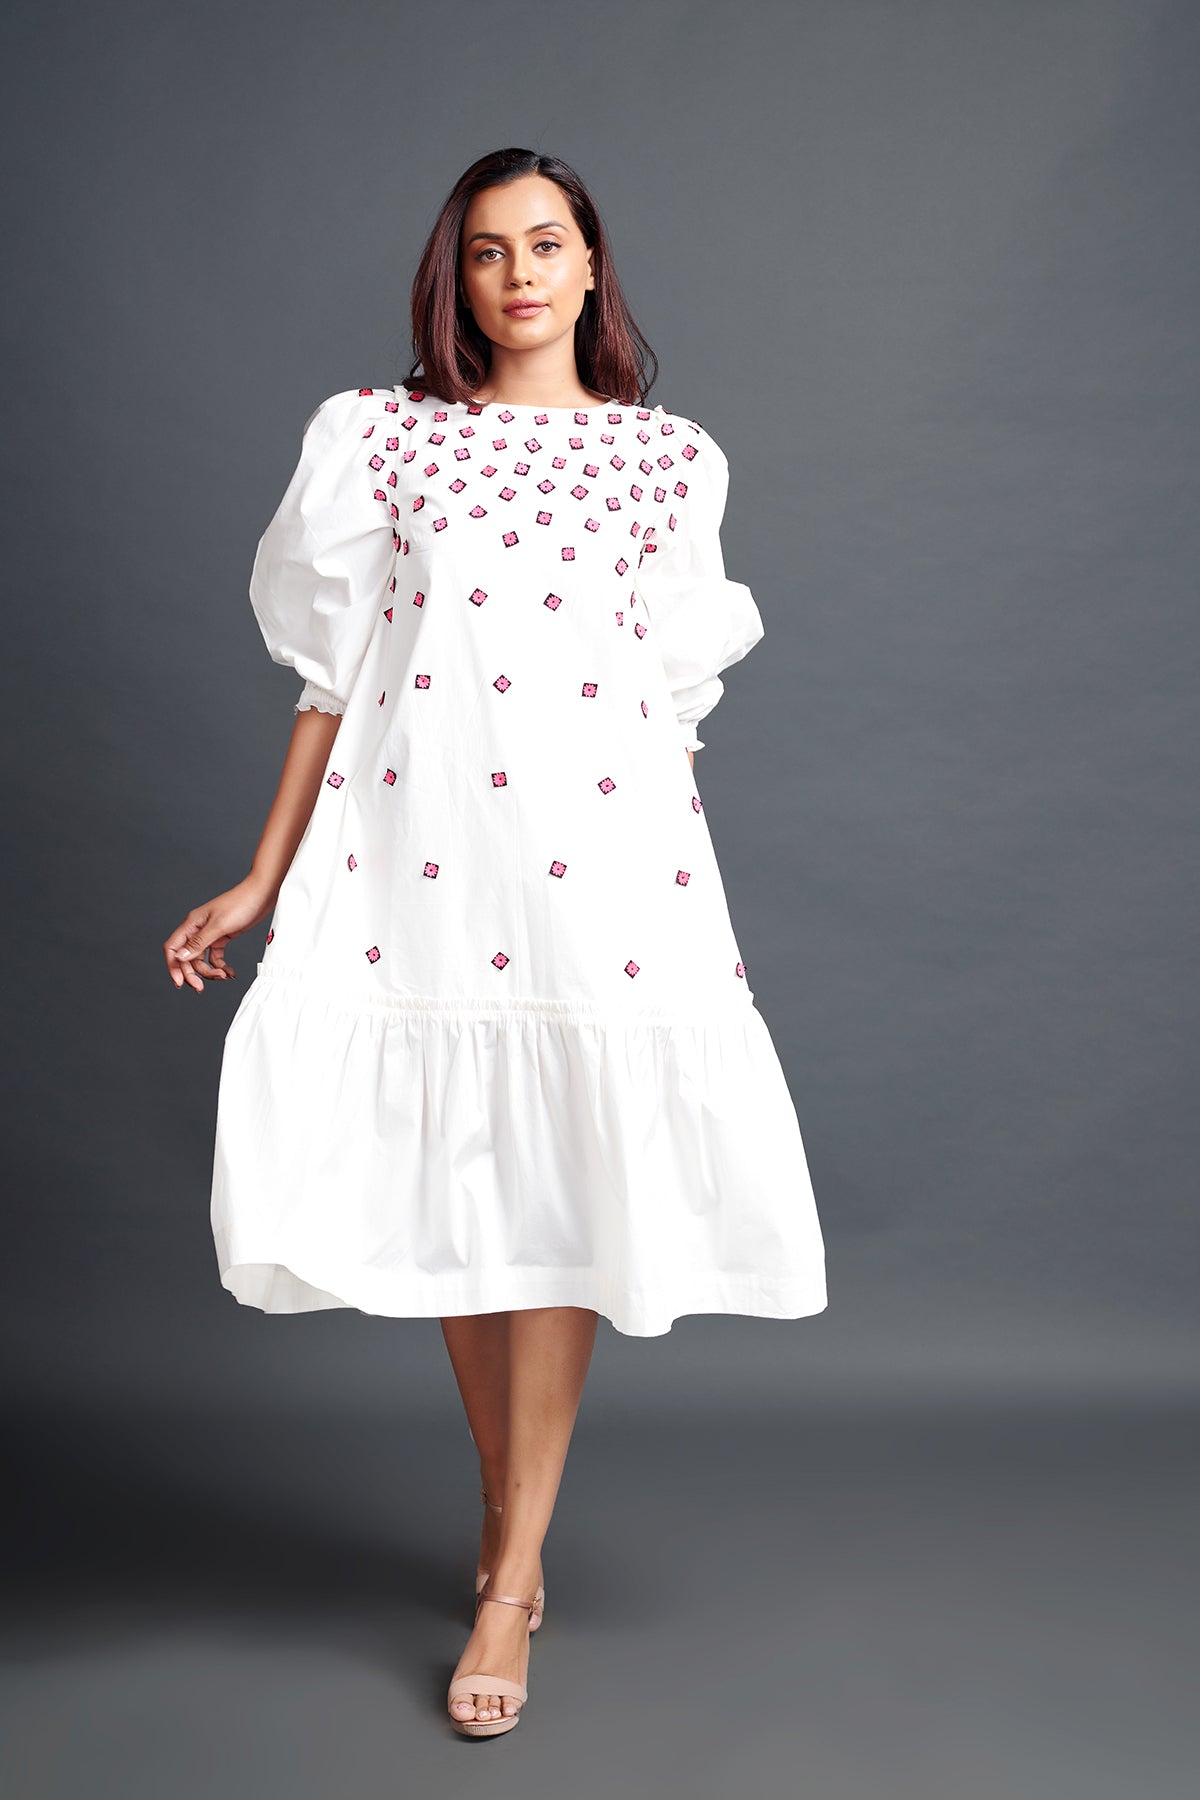 Image of WHITE GATHERED HEM DRESS IN COTTON BASE WITH CUTWORK EMBROIDERY. From savoirfashions.com